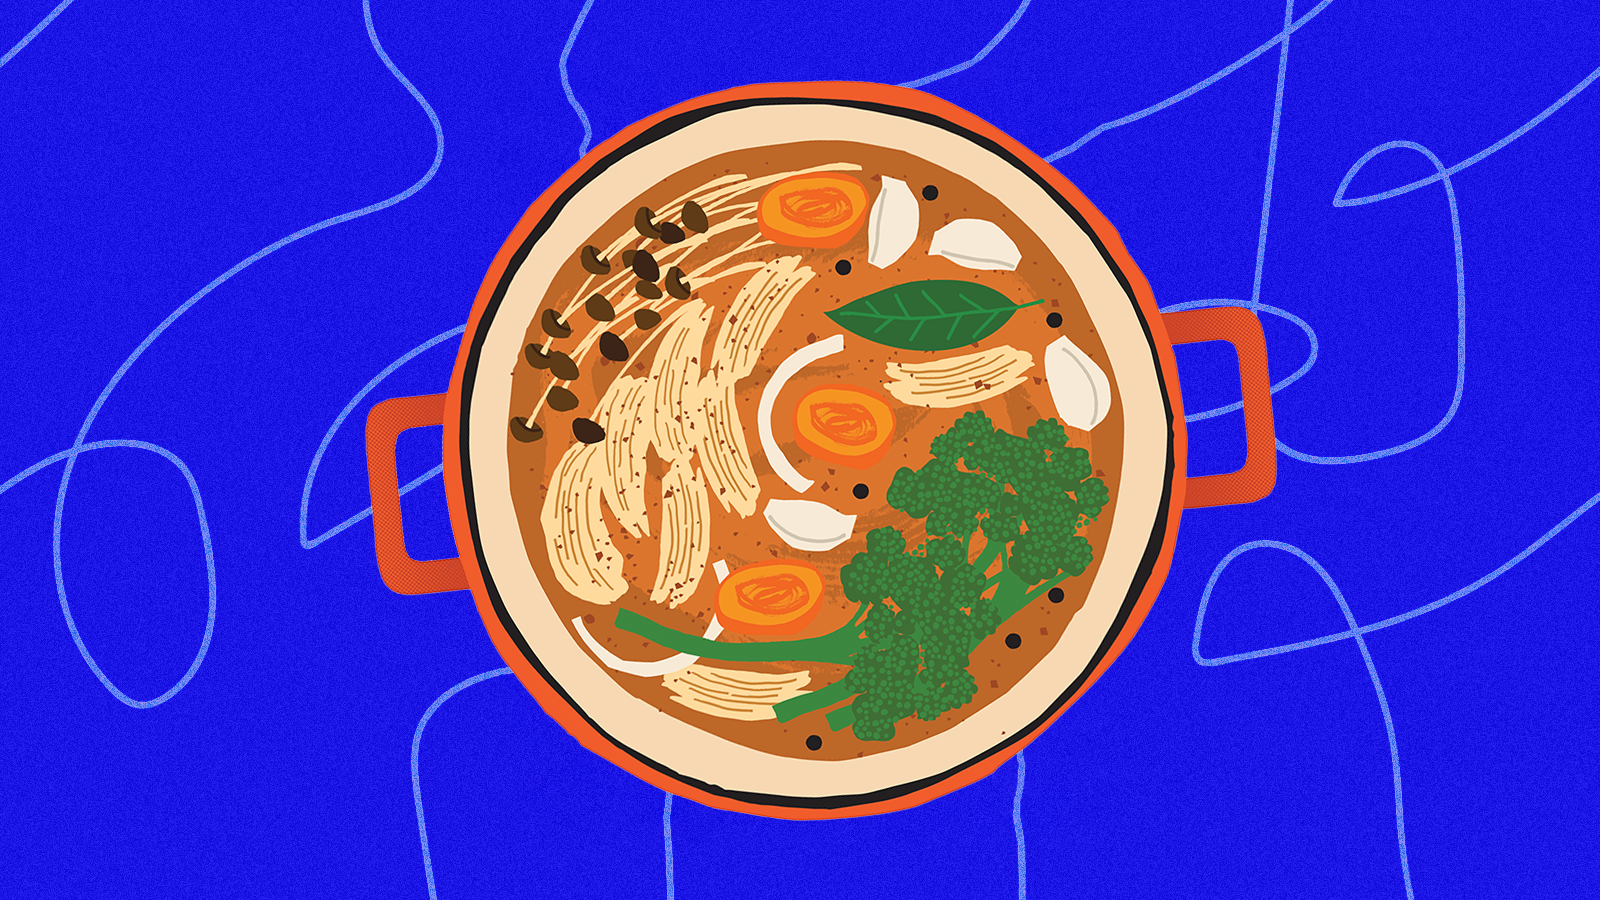 An illustration of chicken soup.